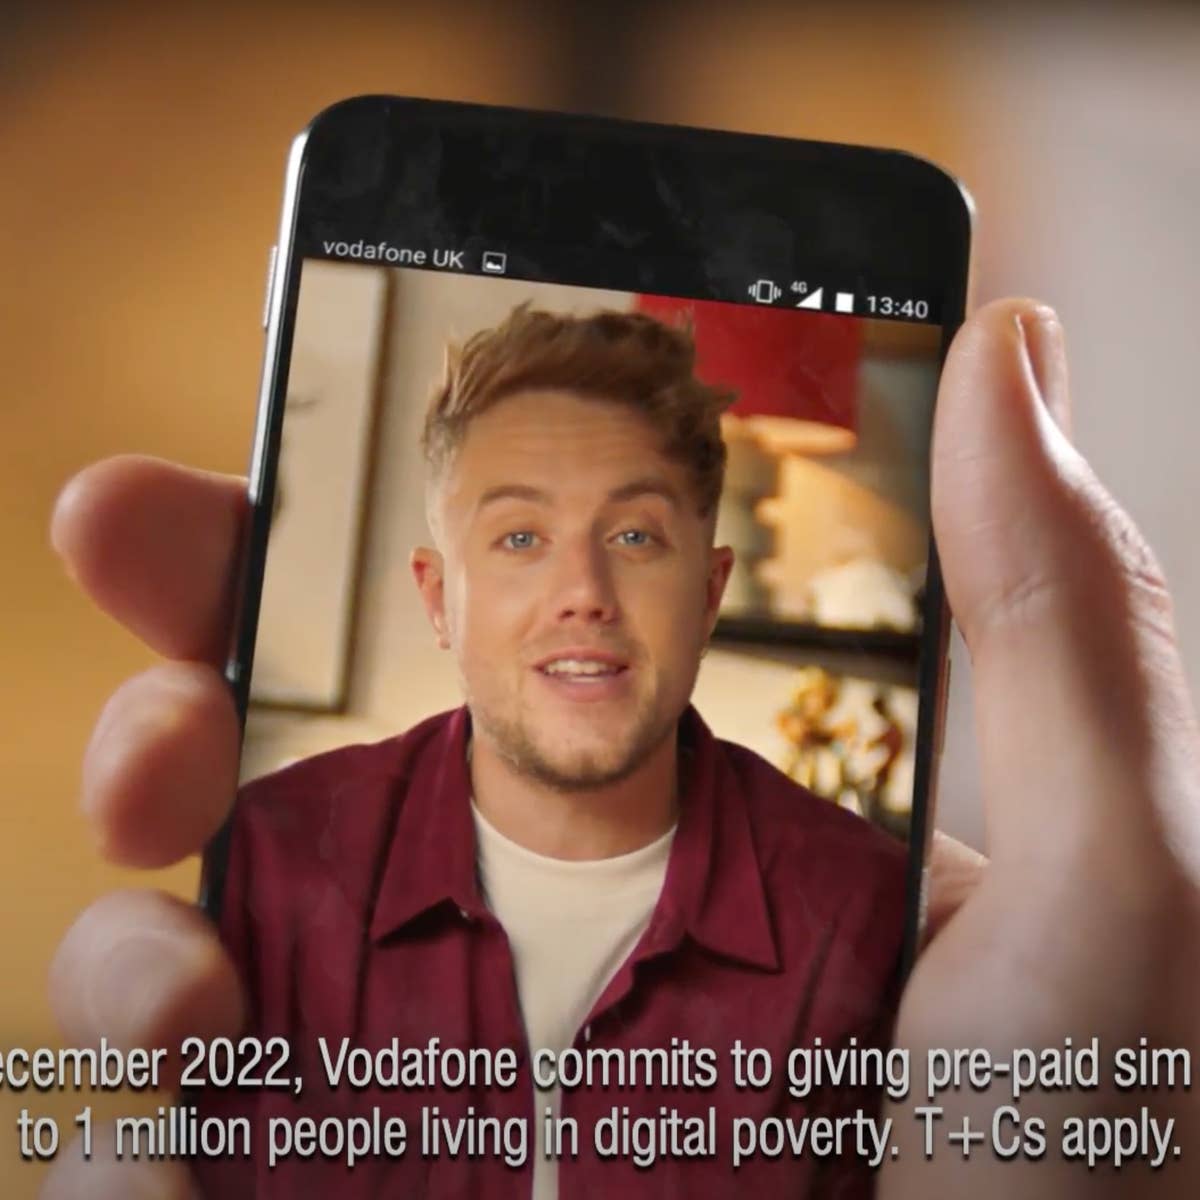 Vodafone and ITV join forces for 'ReBoxing Day'